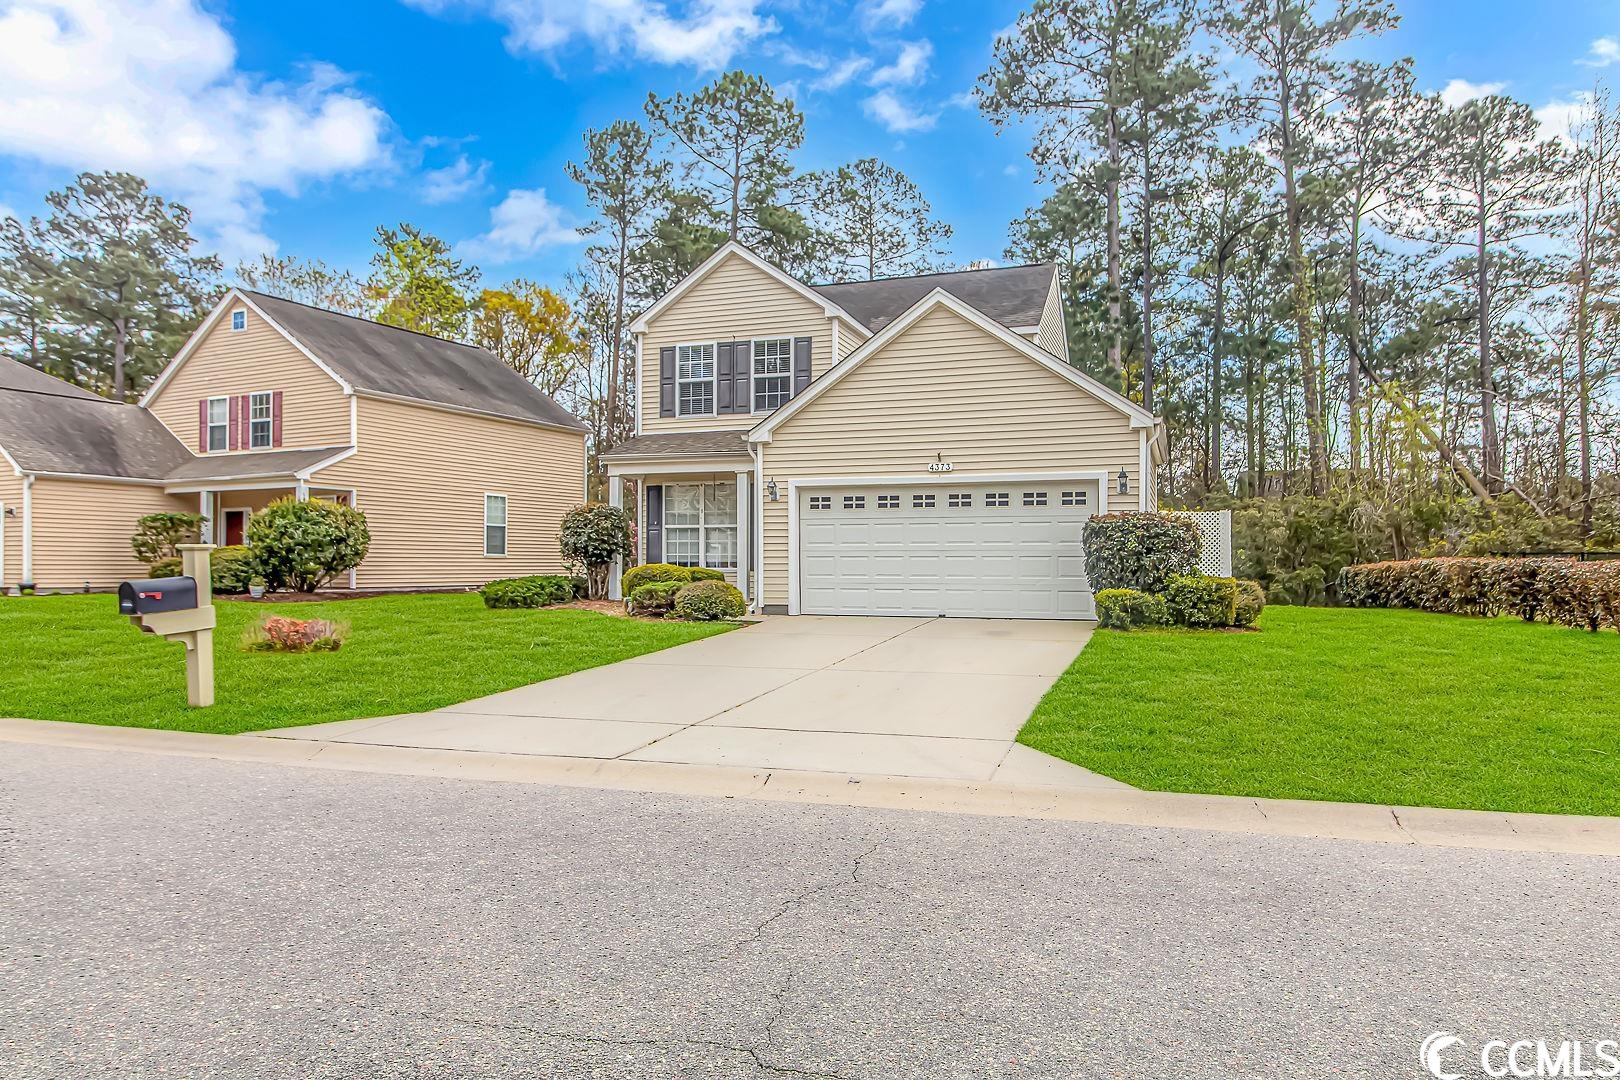 4373 Red Rooster Ln. Myrtle Beach, SC 29579